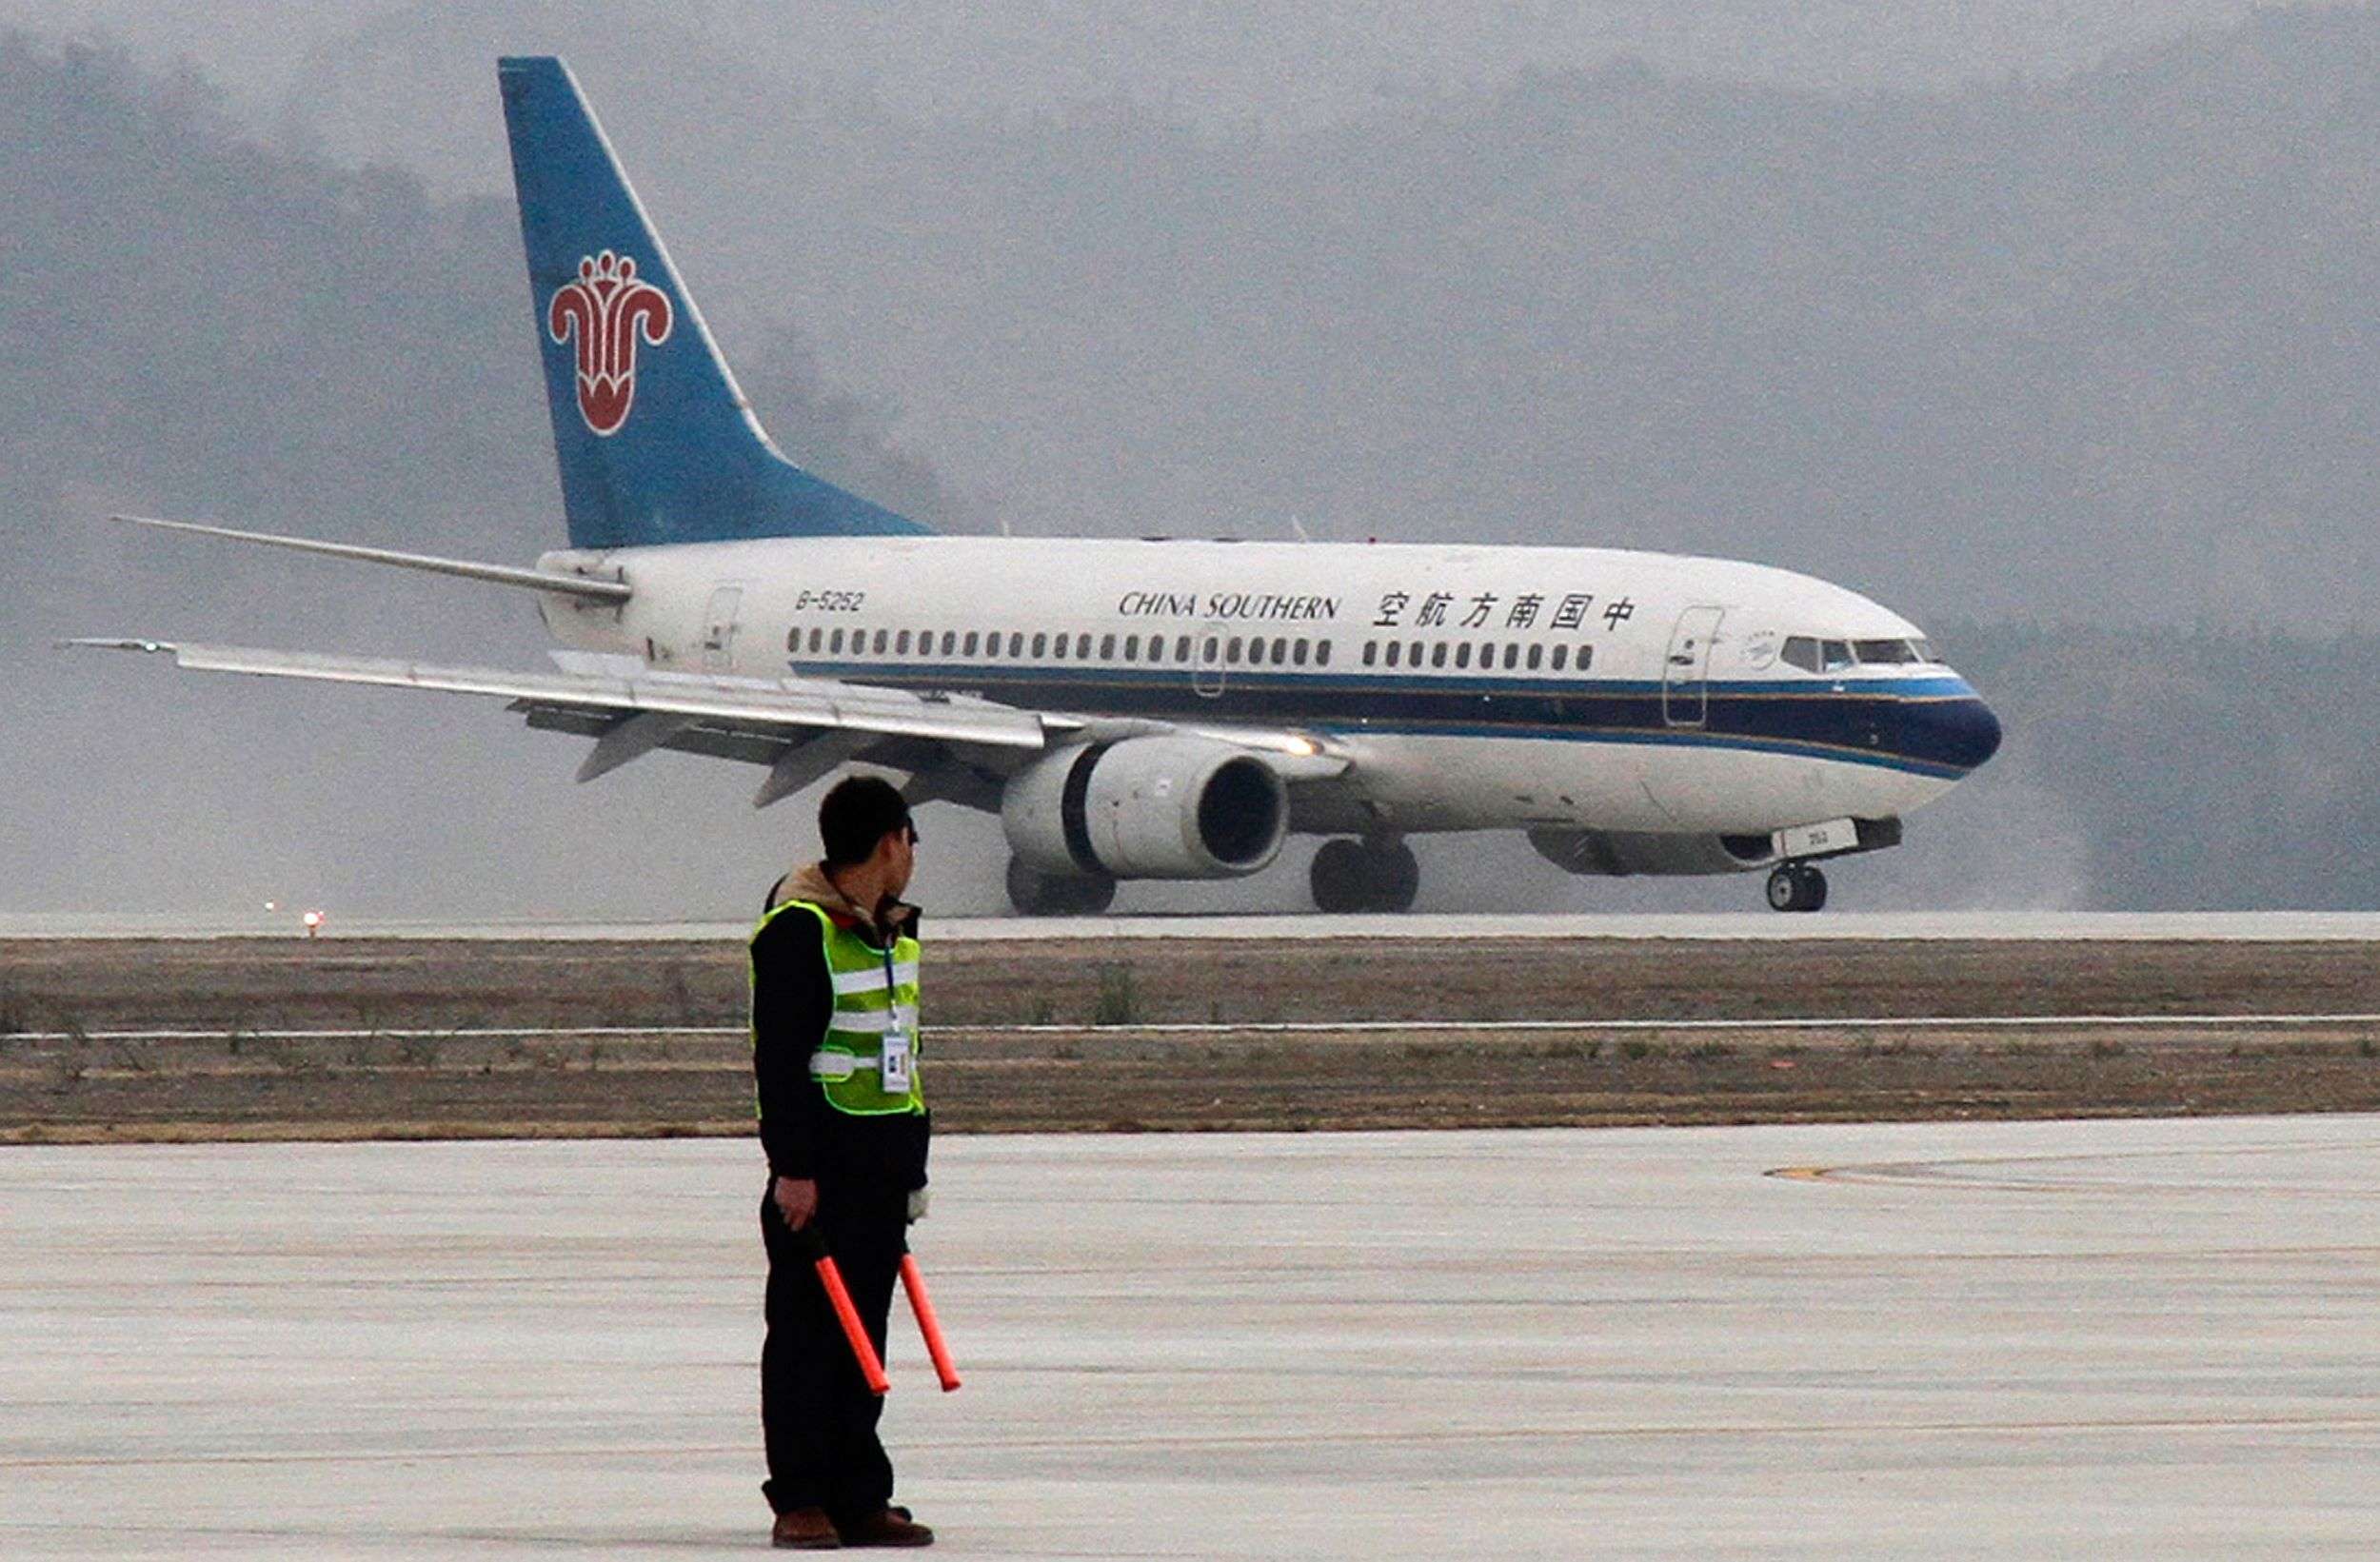 China Southern Airlines saw its net profit surge 35 per cent to 5.04 billion yuan last year. Photo: AFP